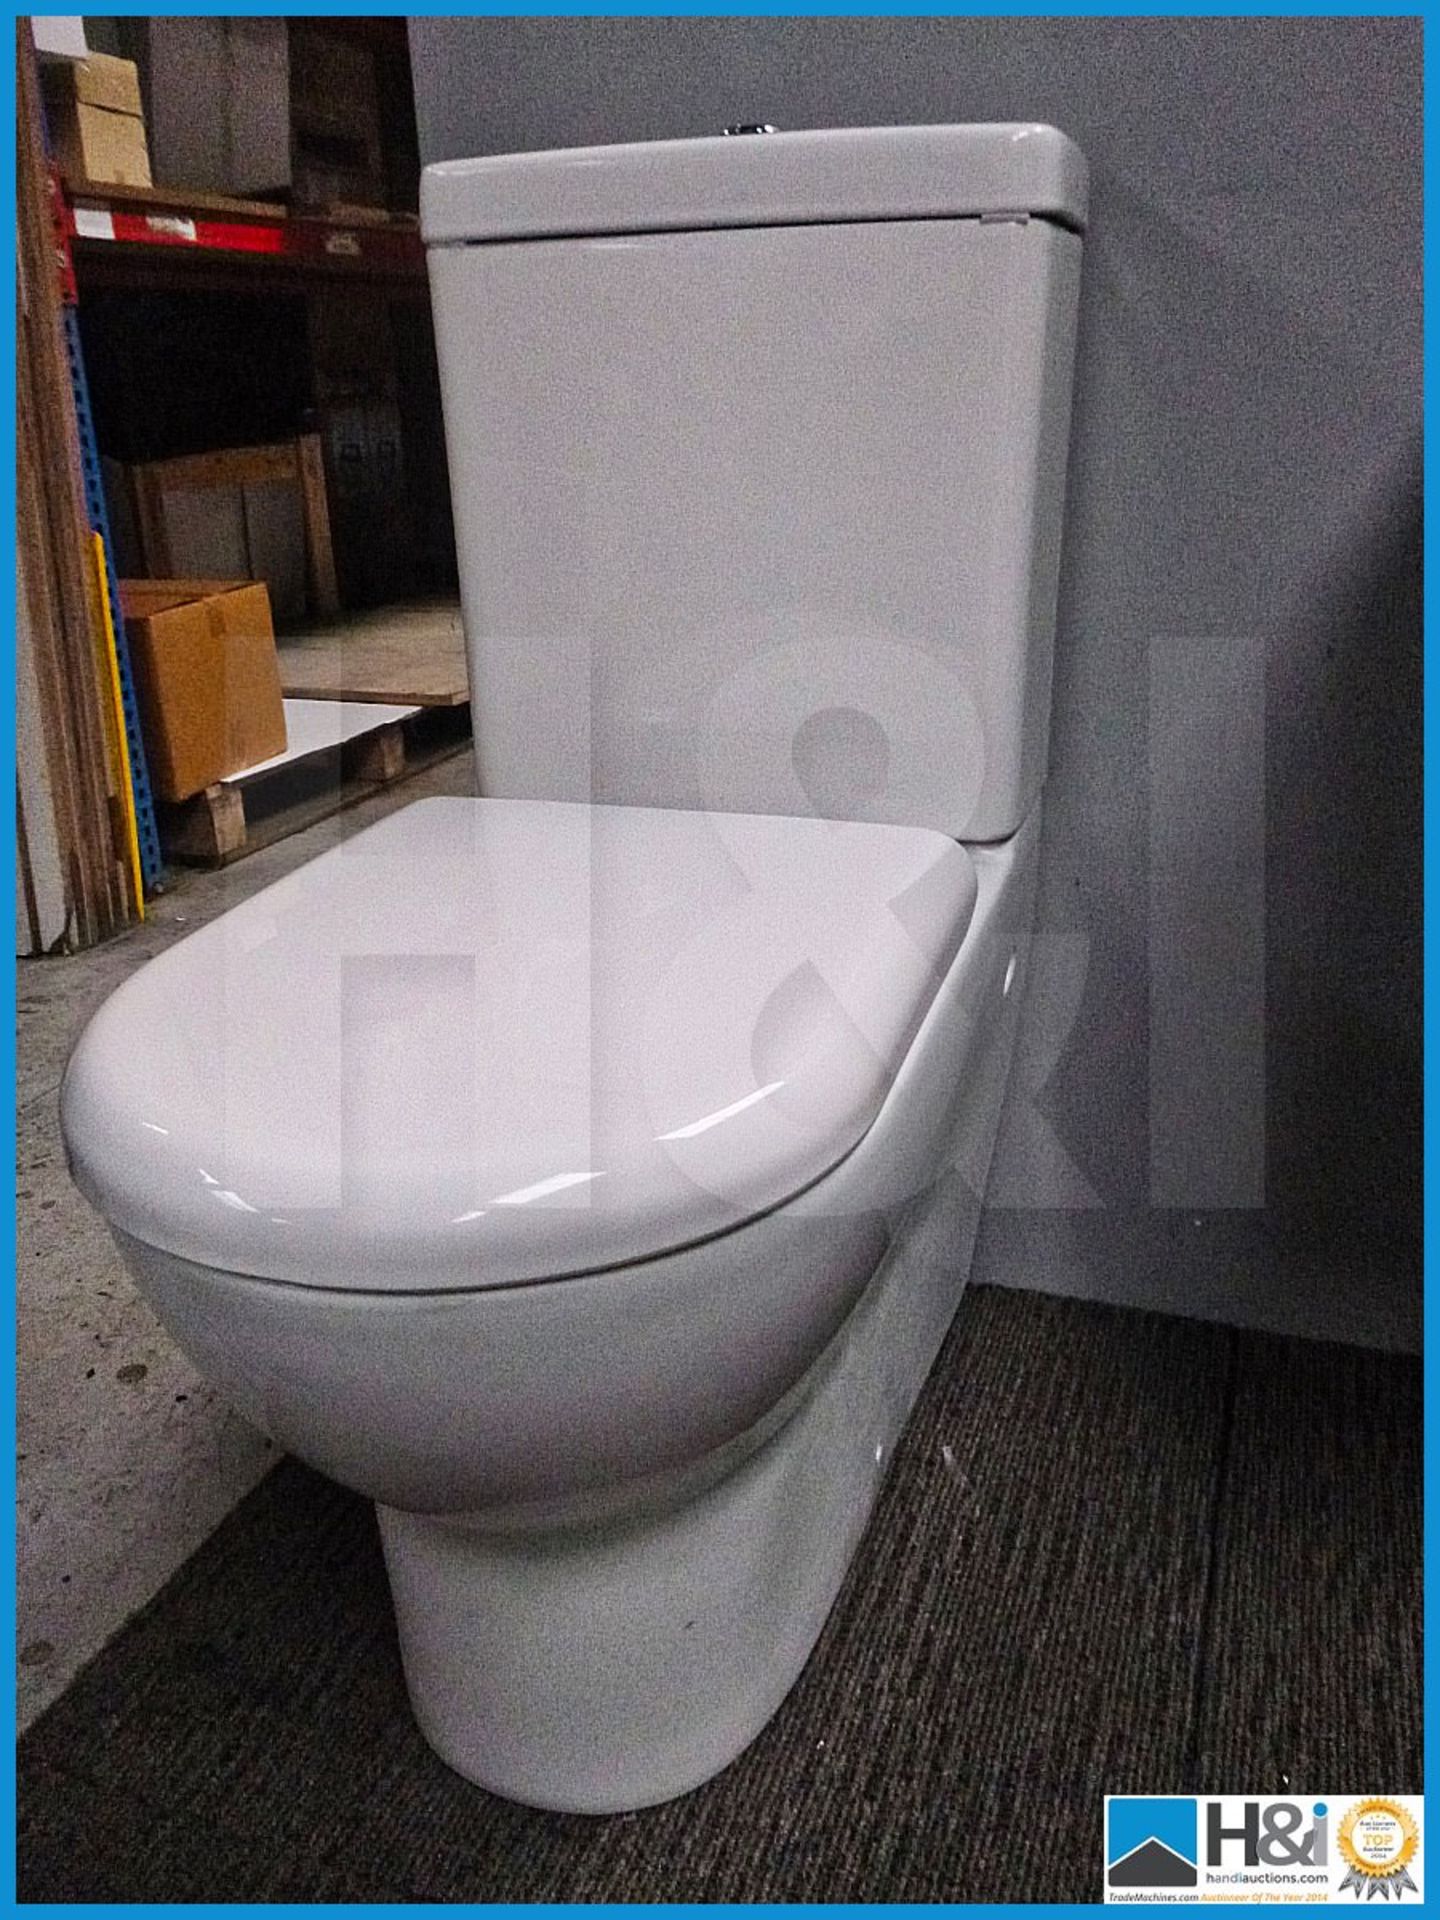 Luxury K 014 Full facia close coupled toilet. Complete with clean easy soft close seat RRP 599 GBP. - Image 3 of 4